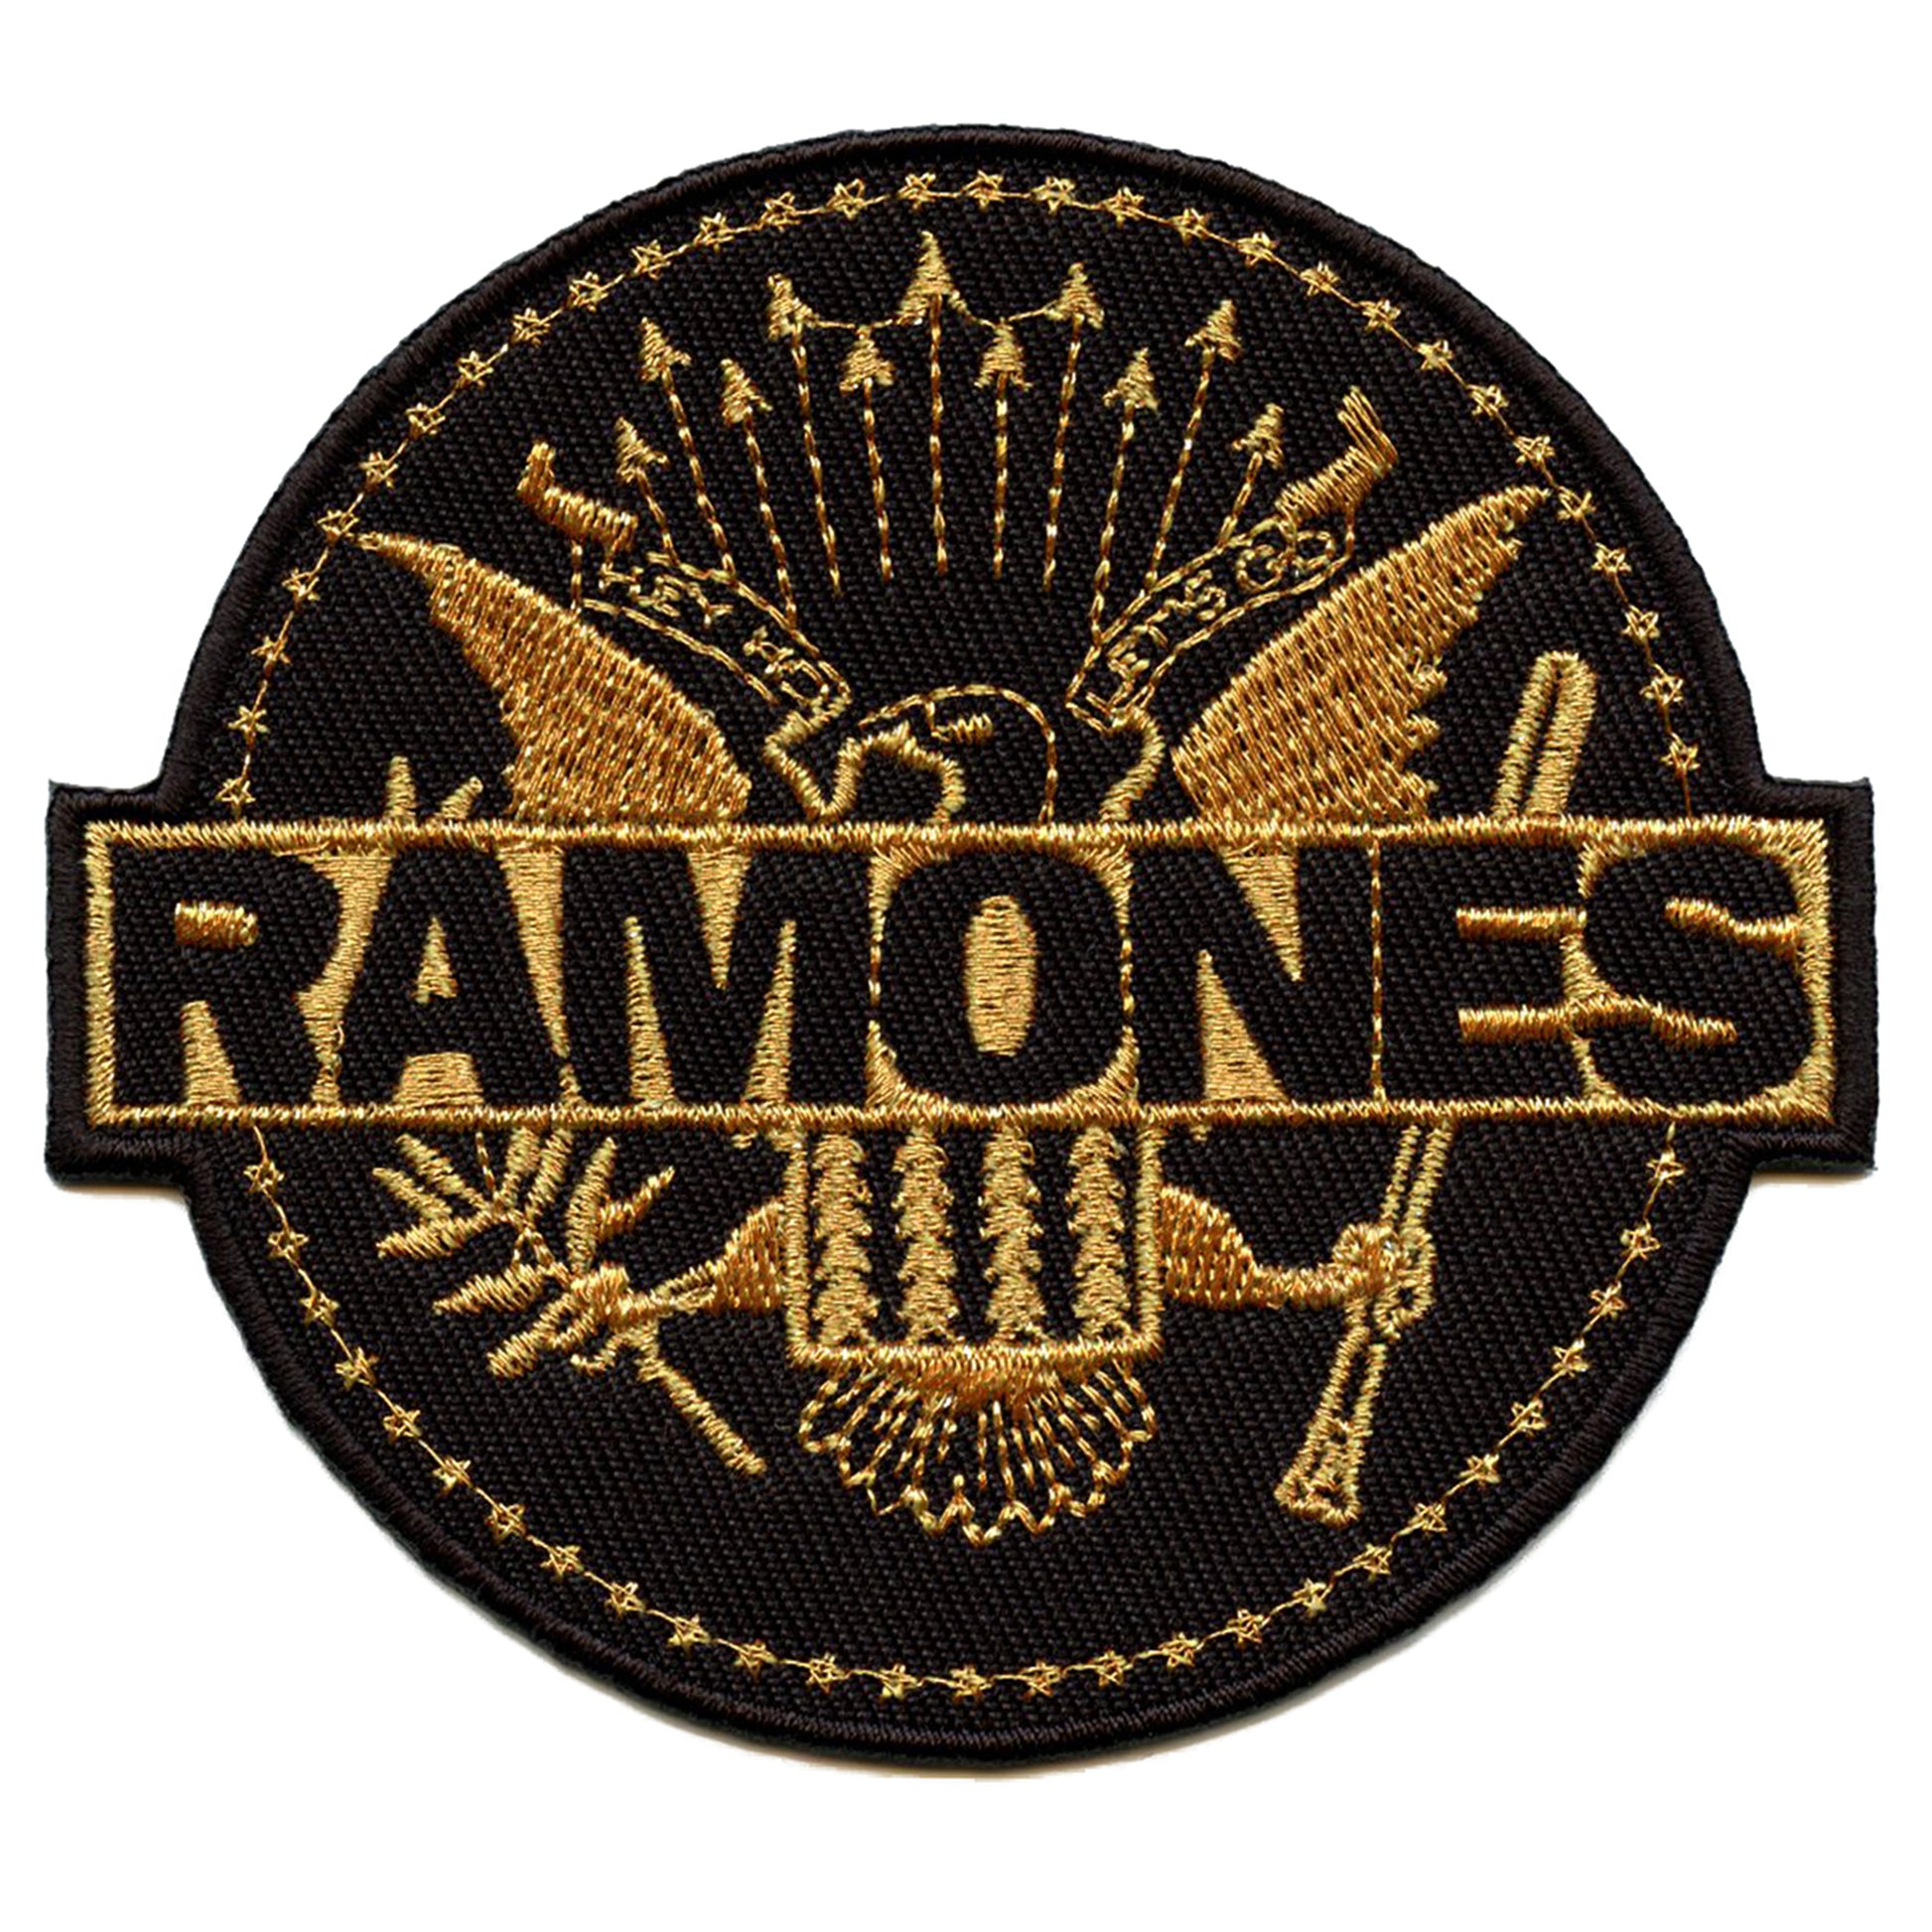 The Ramones Gold Seal Logo Patch Punk Rock Band Embroidered Iron On